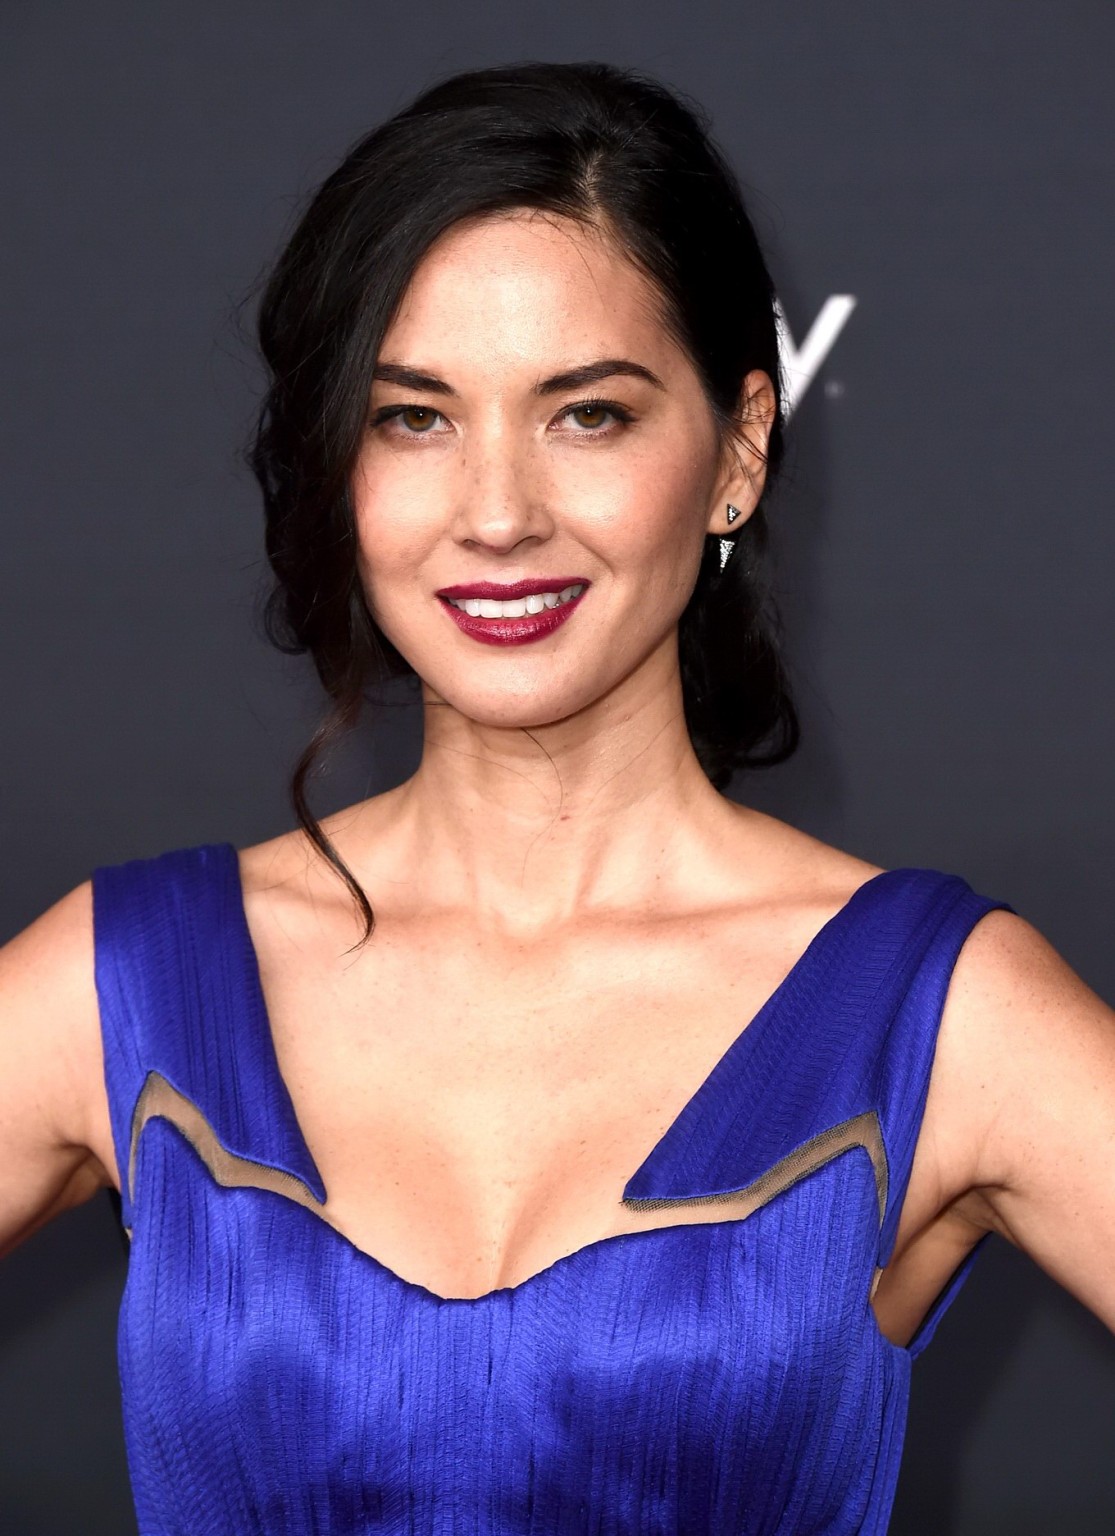 Olivia Munn wearing a low cut blue dress at the 4th annual NFL Honors in Phoenix